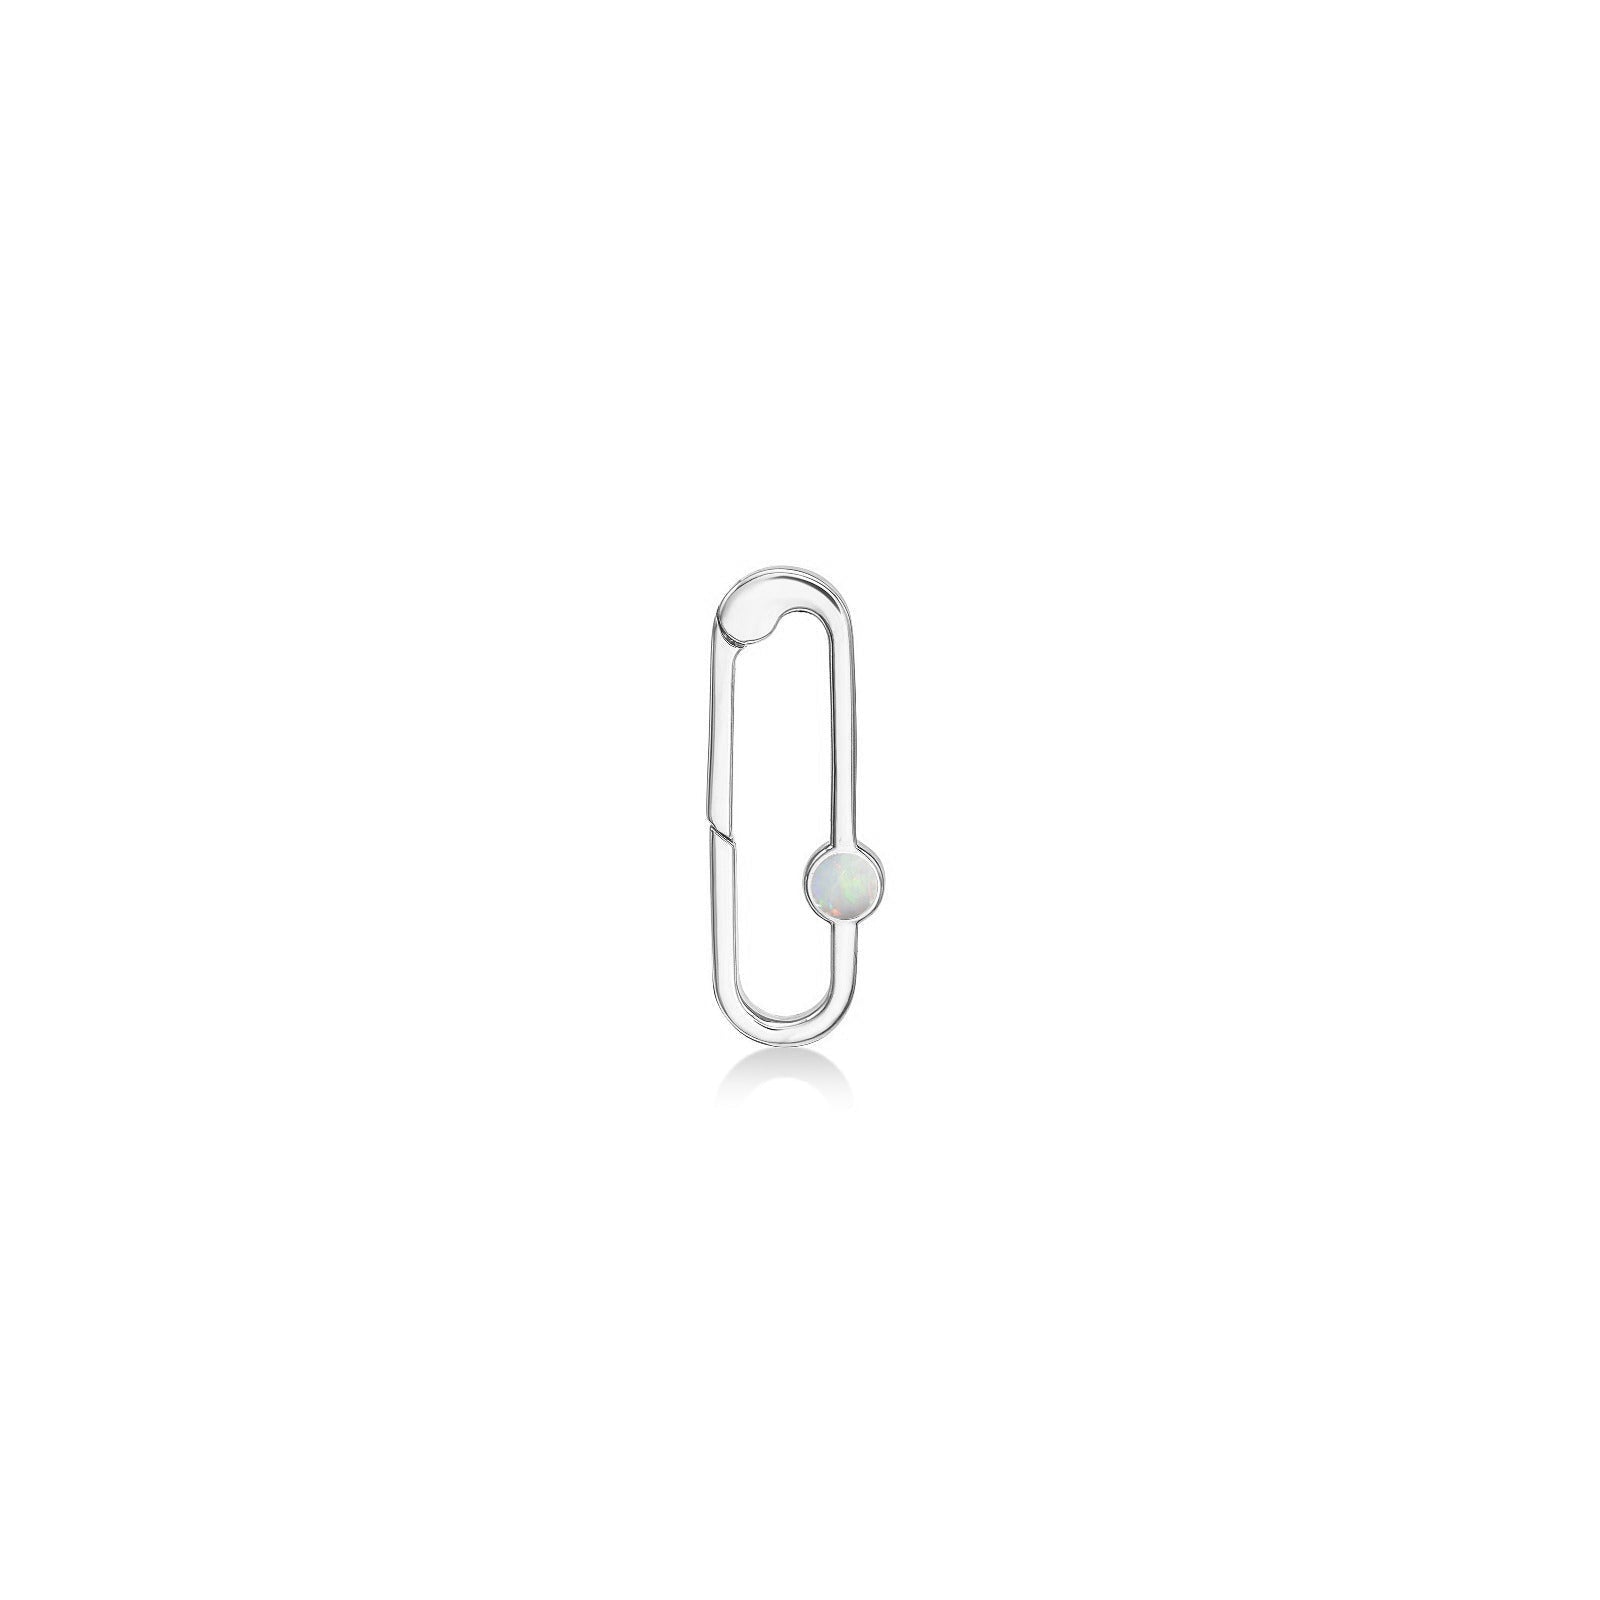 14k white gold paperclip charm lock with opal